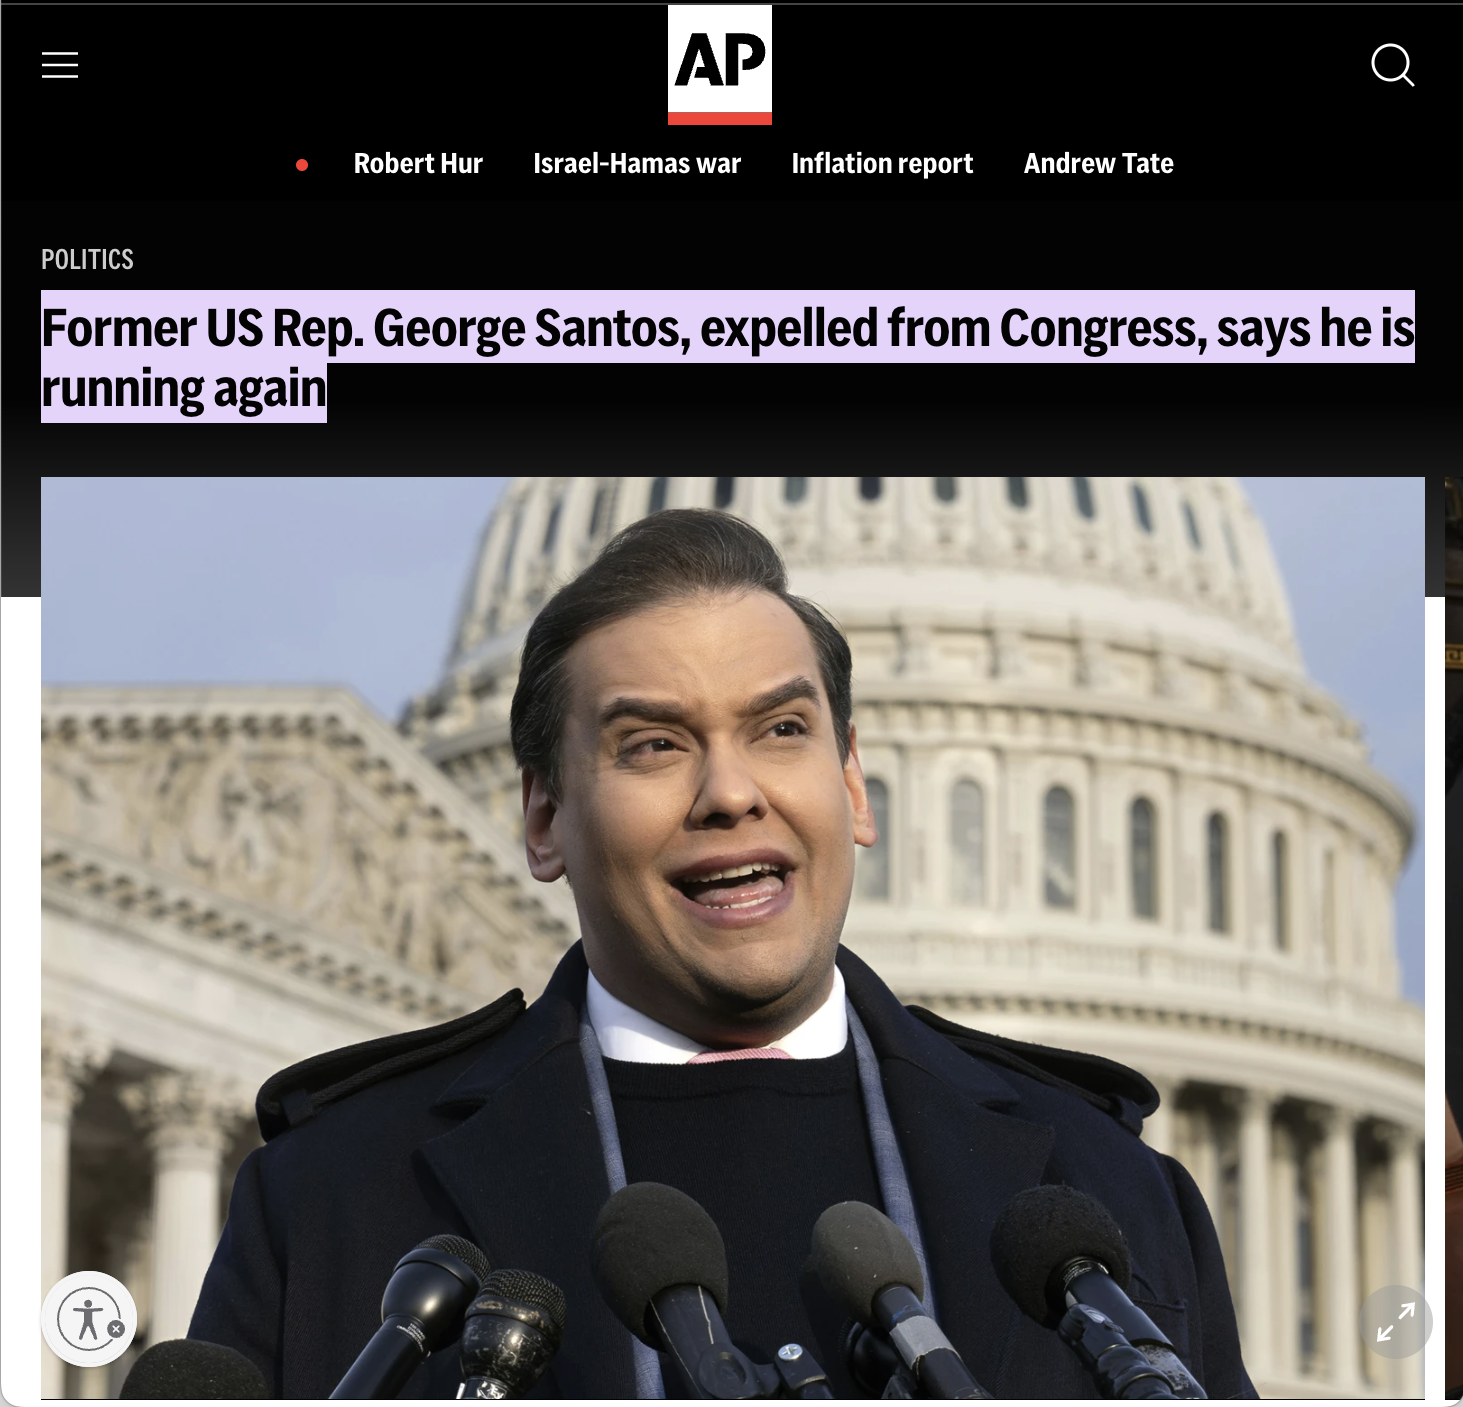 george santos - Ap Robert Hur IsraelHamas war Inflation report Andrew Tate Politics Former Us Rep. George Santos, expelled from Congress, says he is running again to